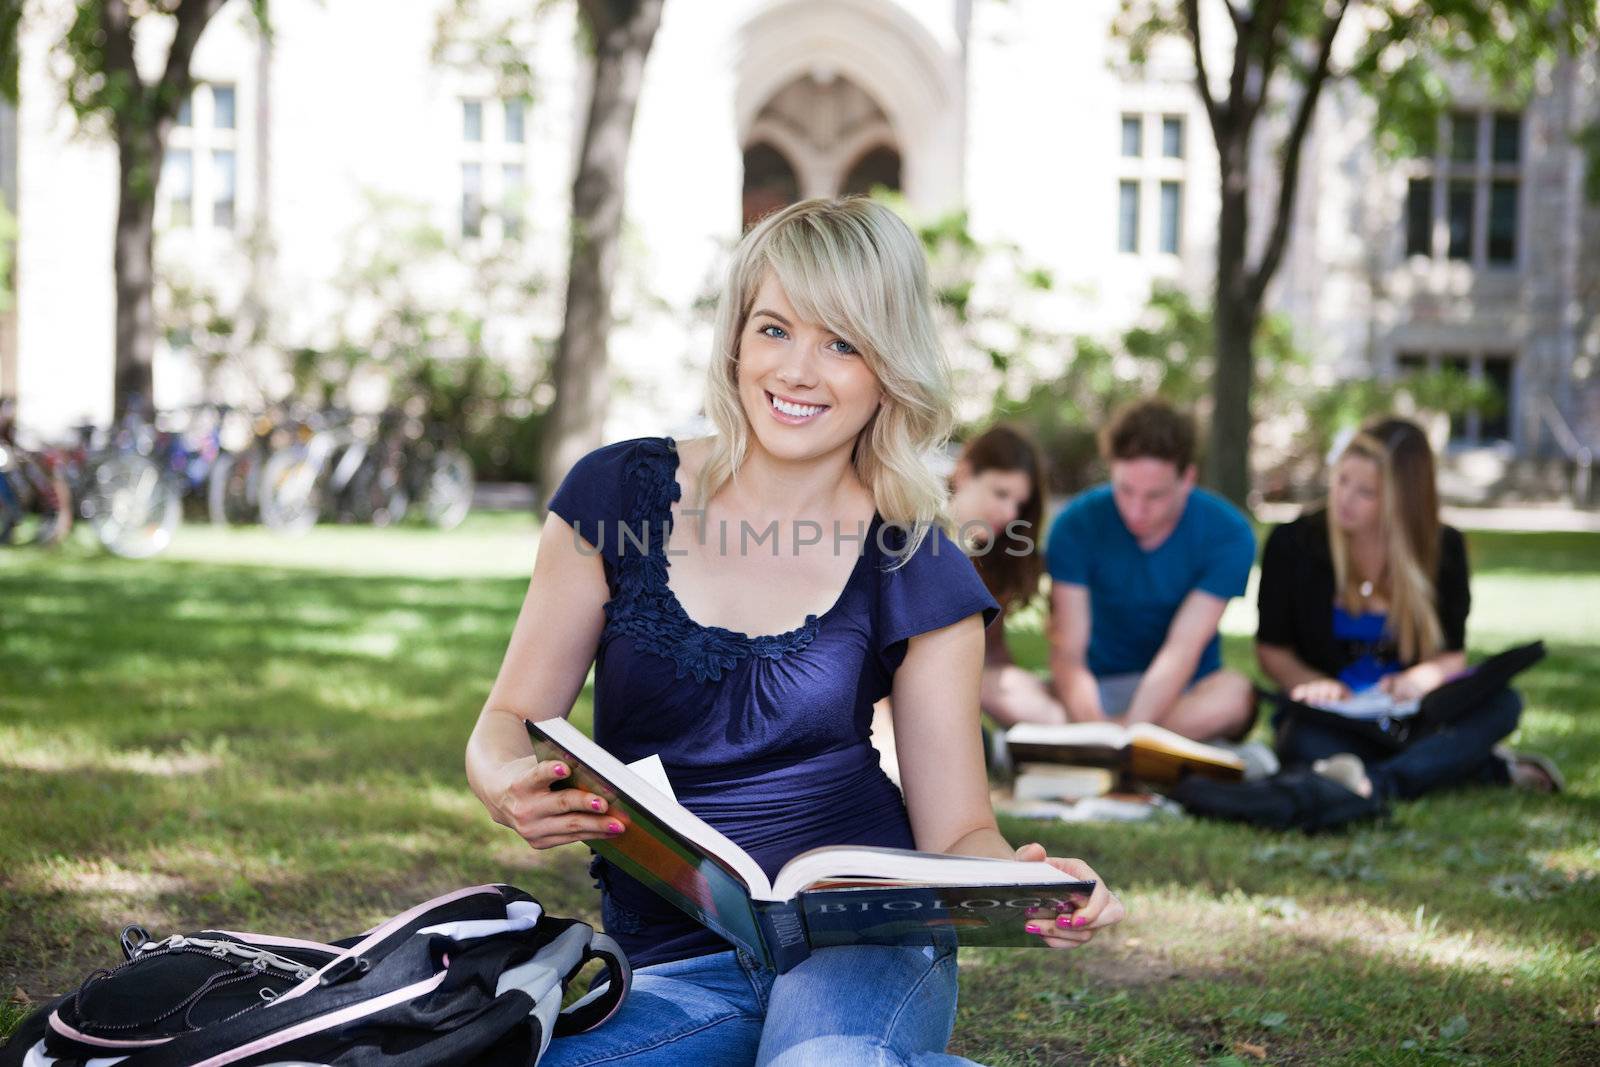 Portrait of smiling young girl with book with her classmates studying in background